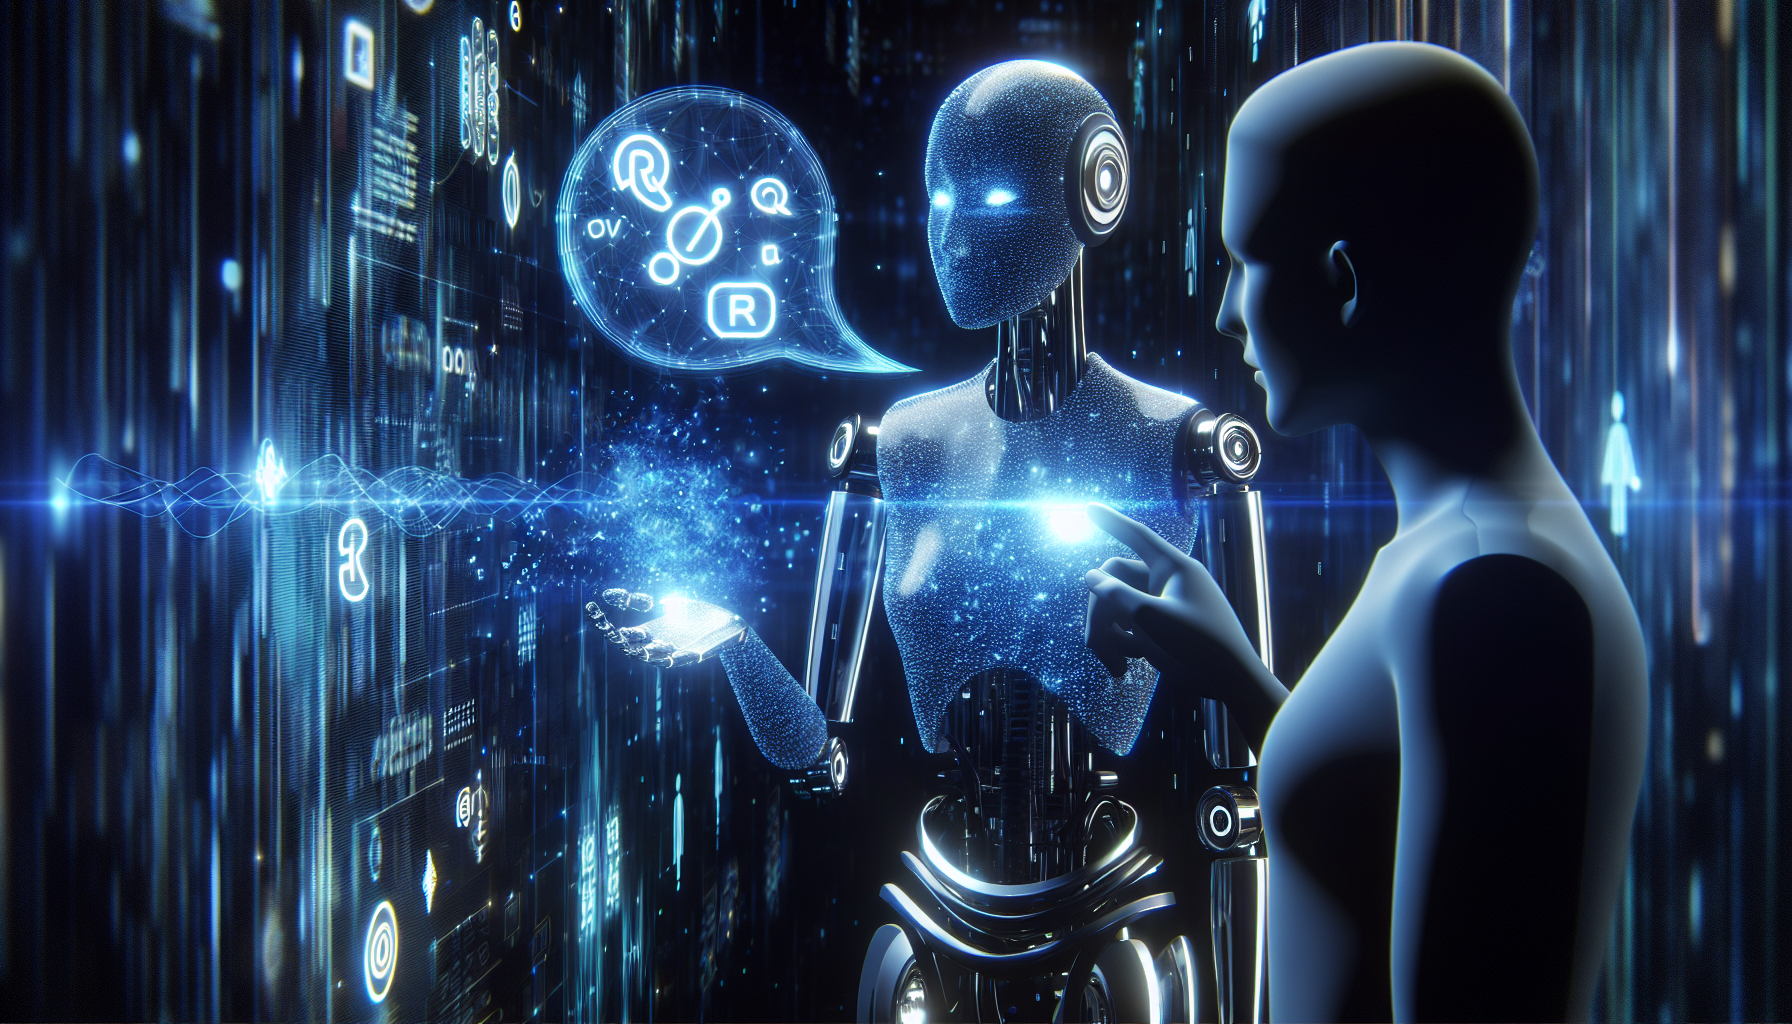 An illustration of a futuristic AI chatbot interacting with a user, representing the concept of Google Bard revolutionizing conversational AI